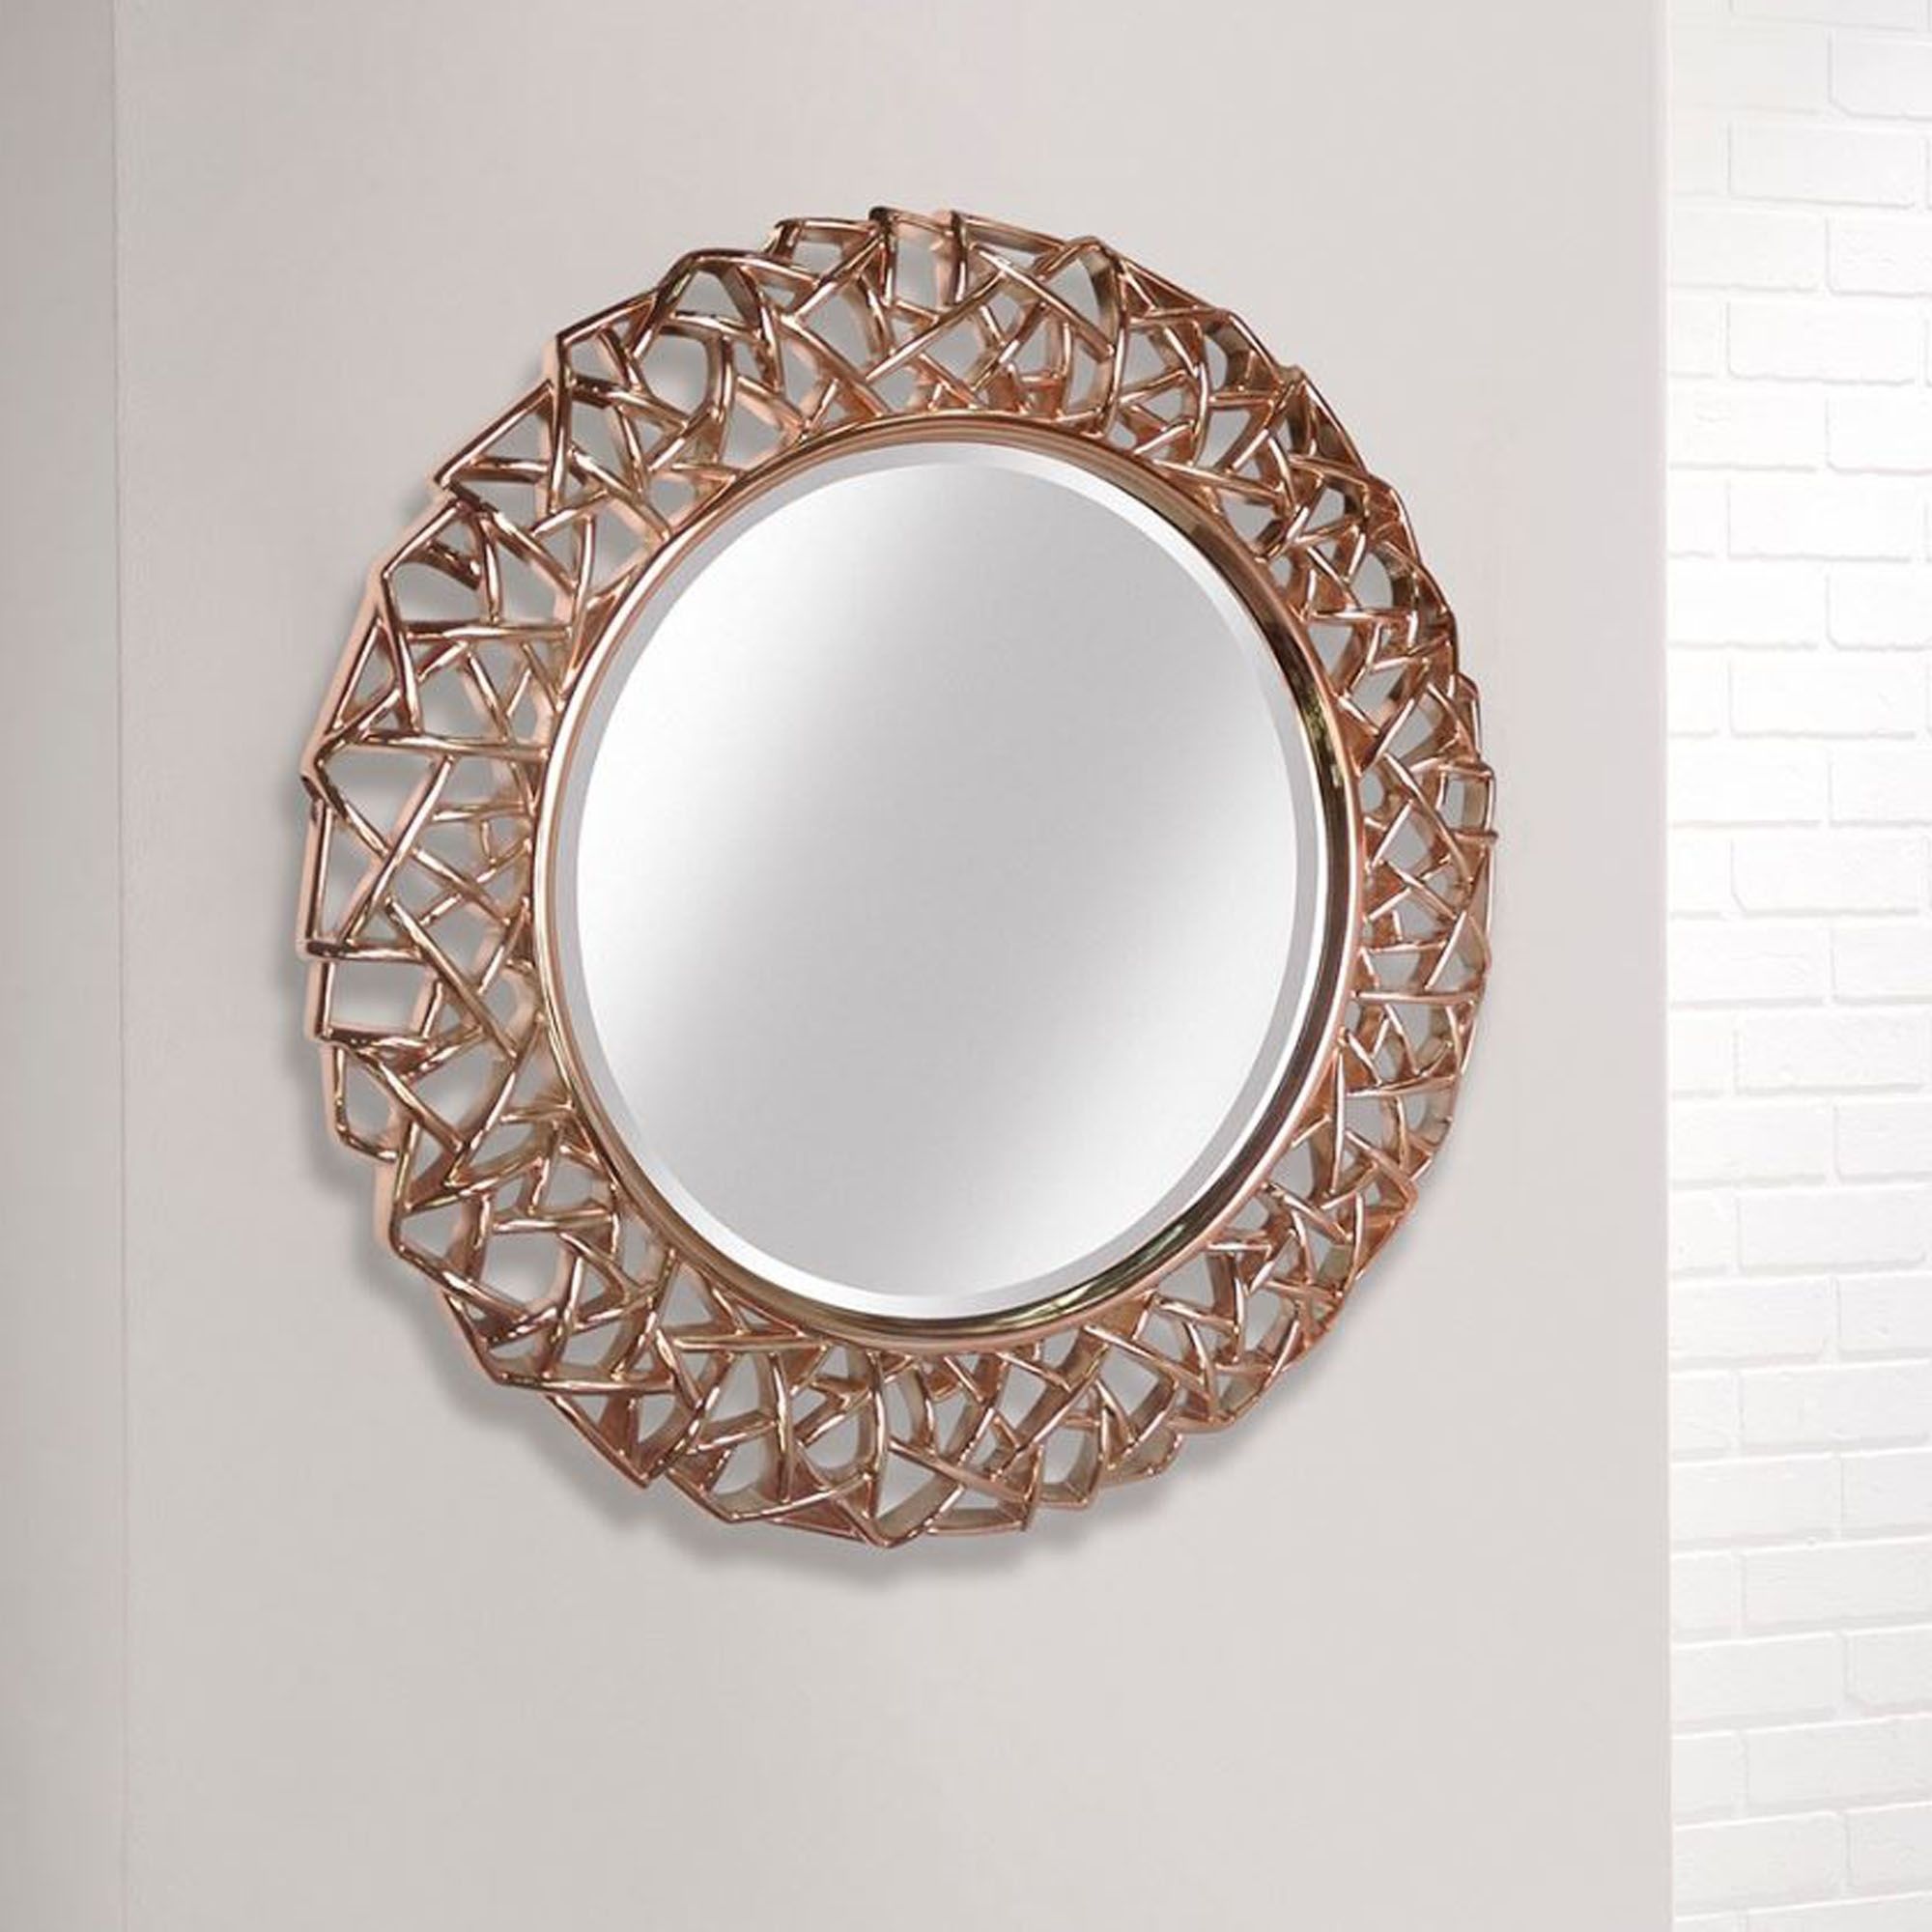 Intricate Rose Gold Round Modern Wall Mirror | Mirrors | Hd365 Inside Gold Decorative Wall Mirrors (View 12 of 15)